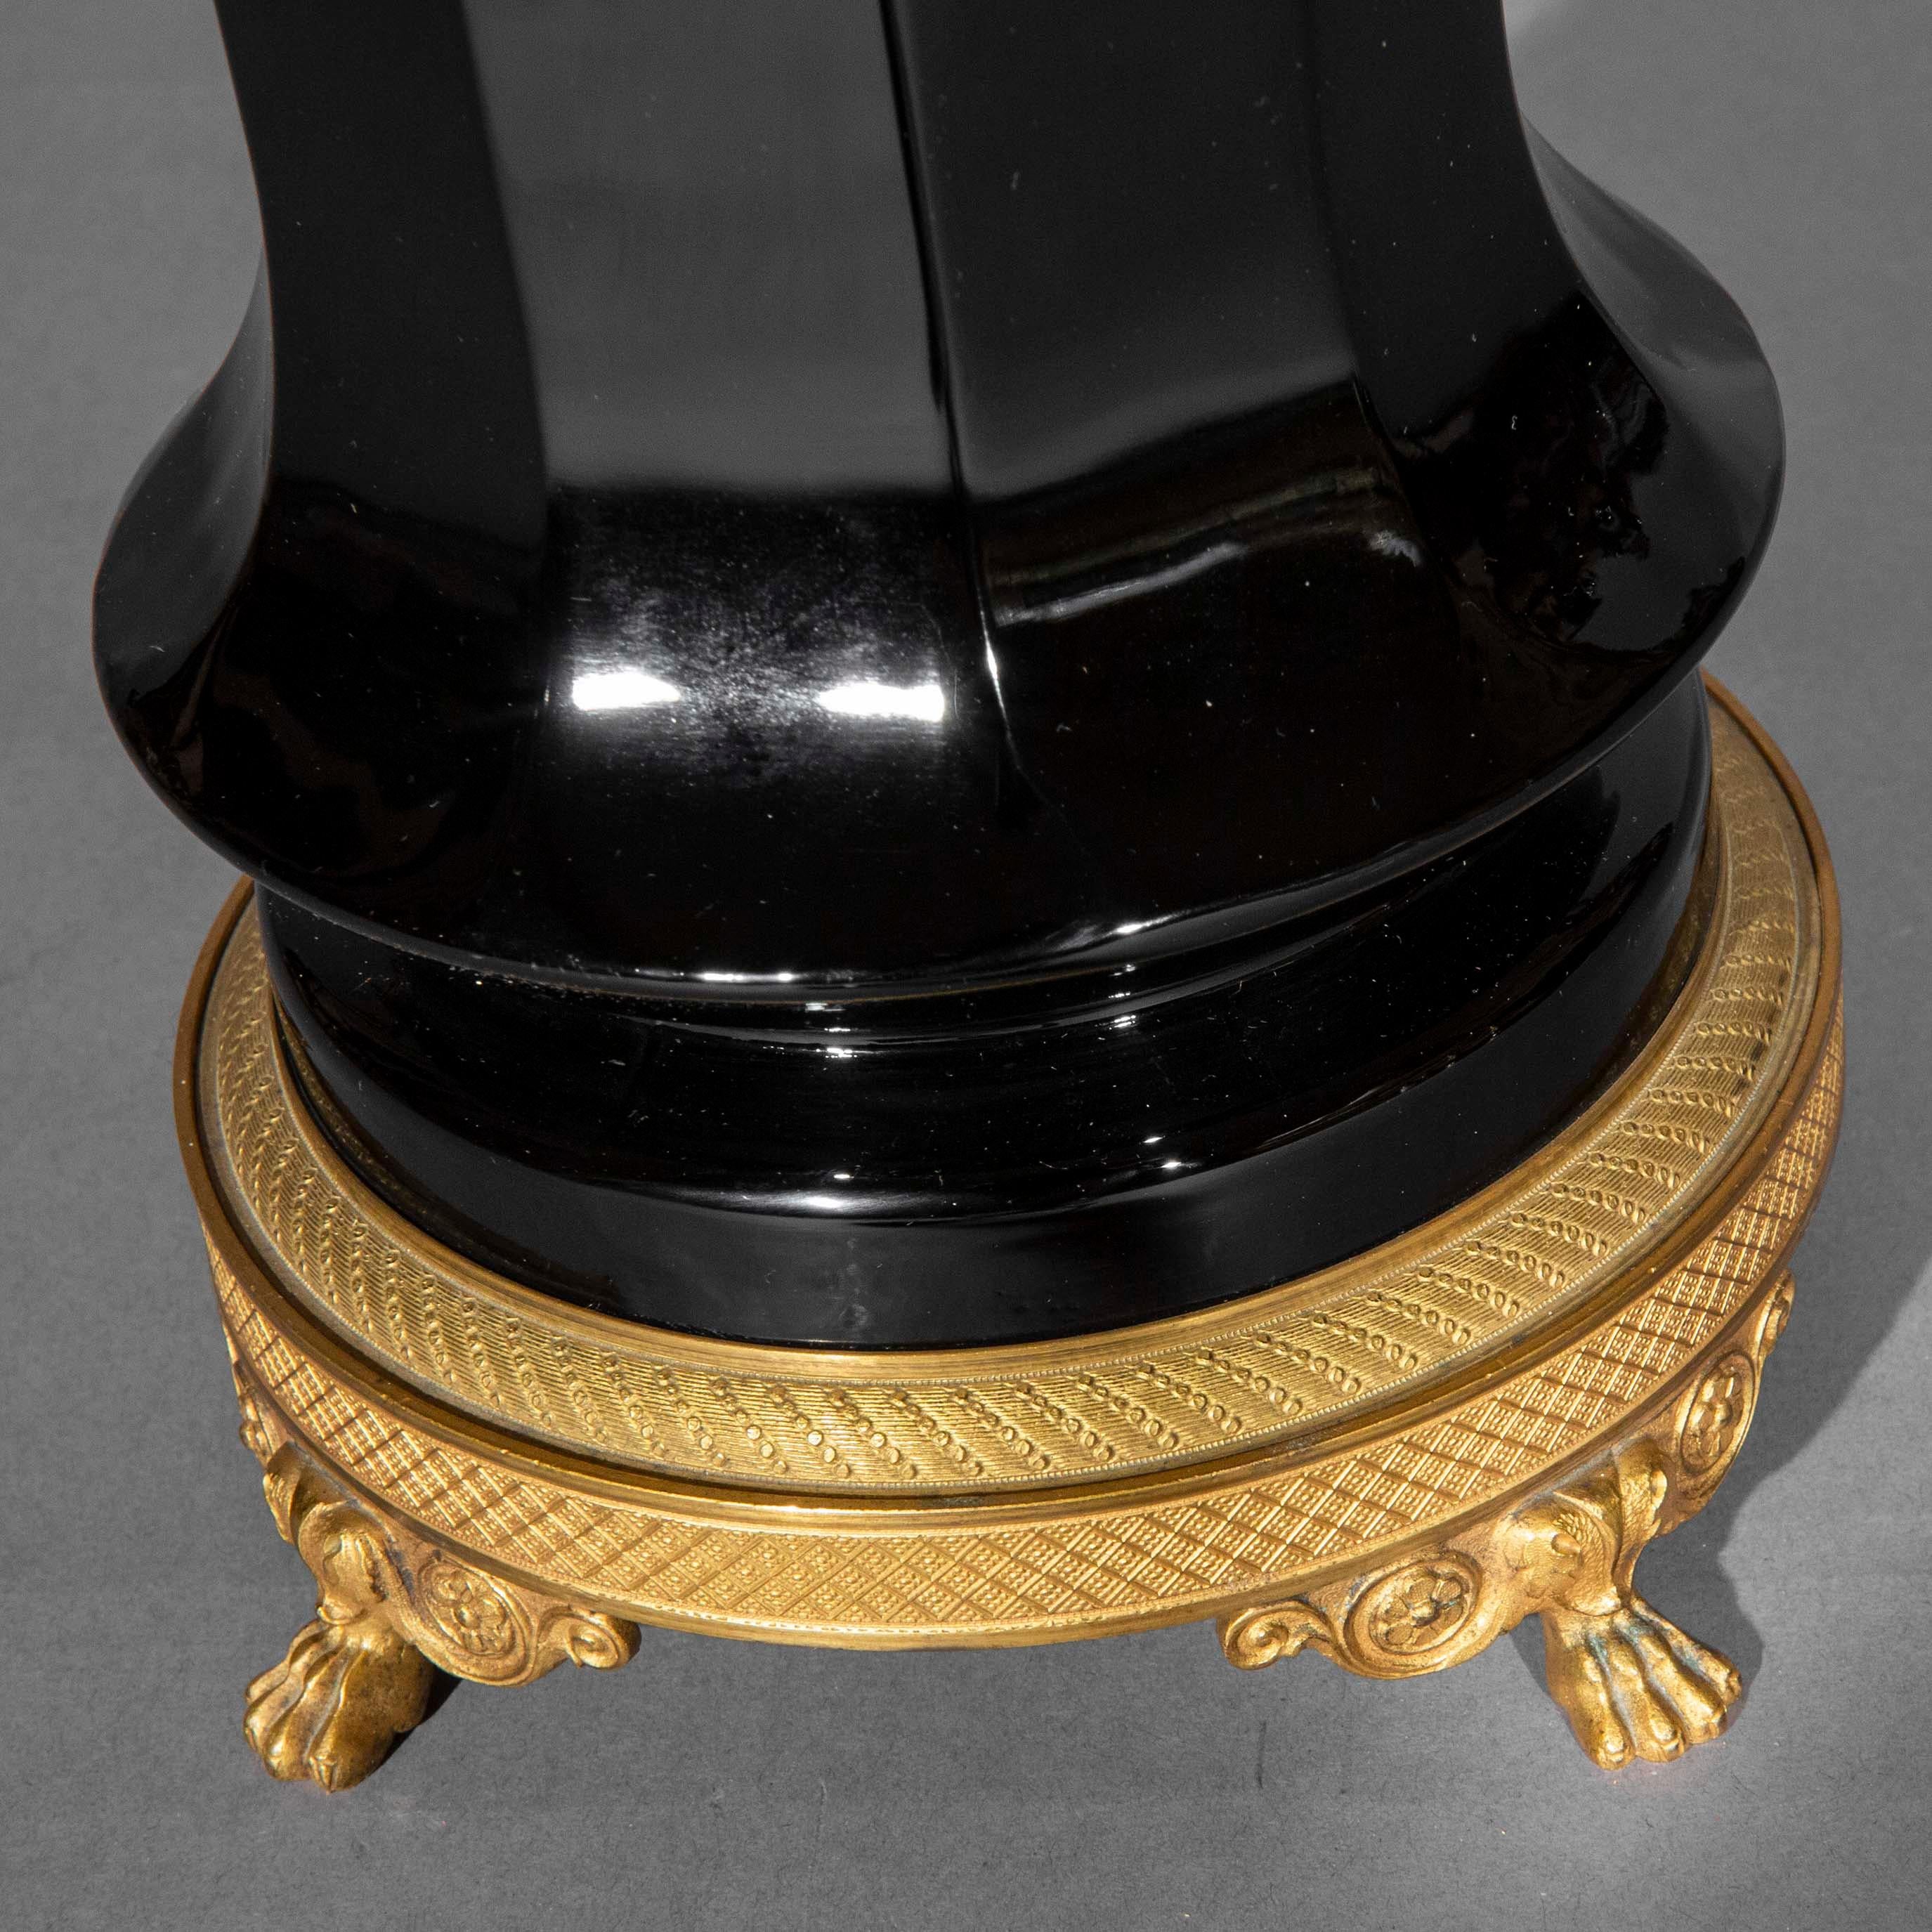 Gilt Antique Table Lamp in Black Opaline Glass with Ormolu Mounts